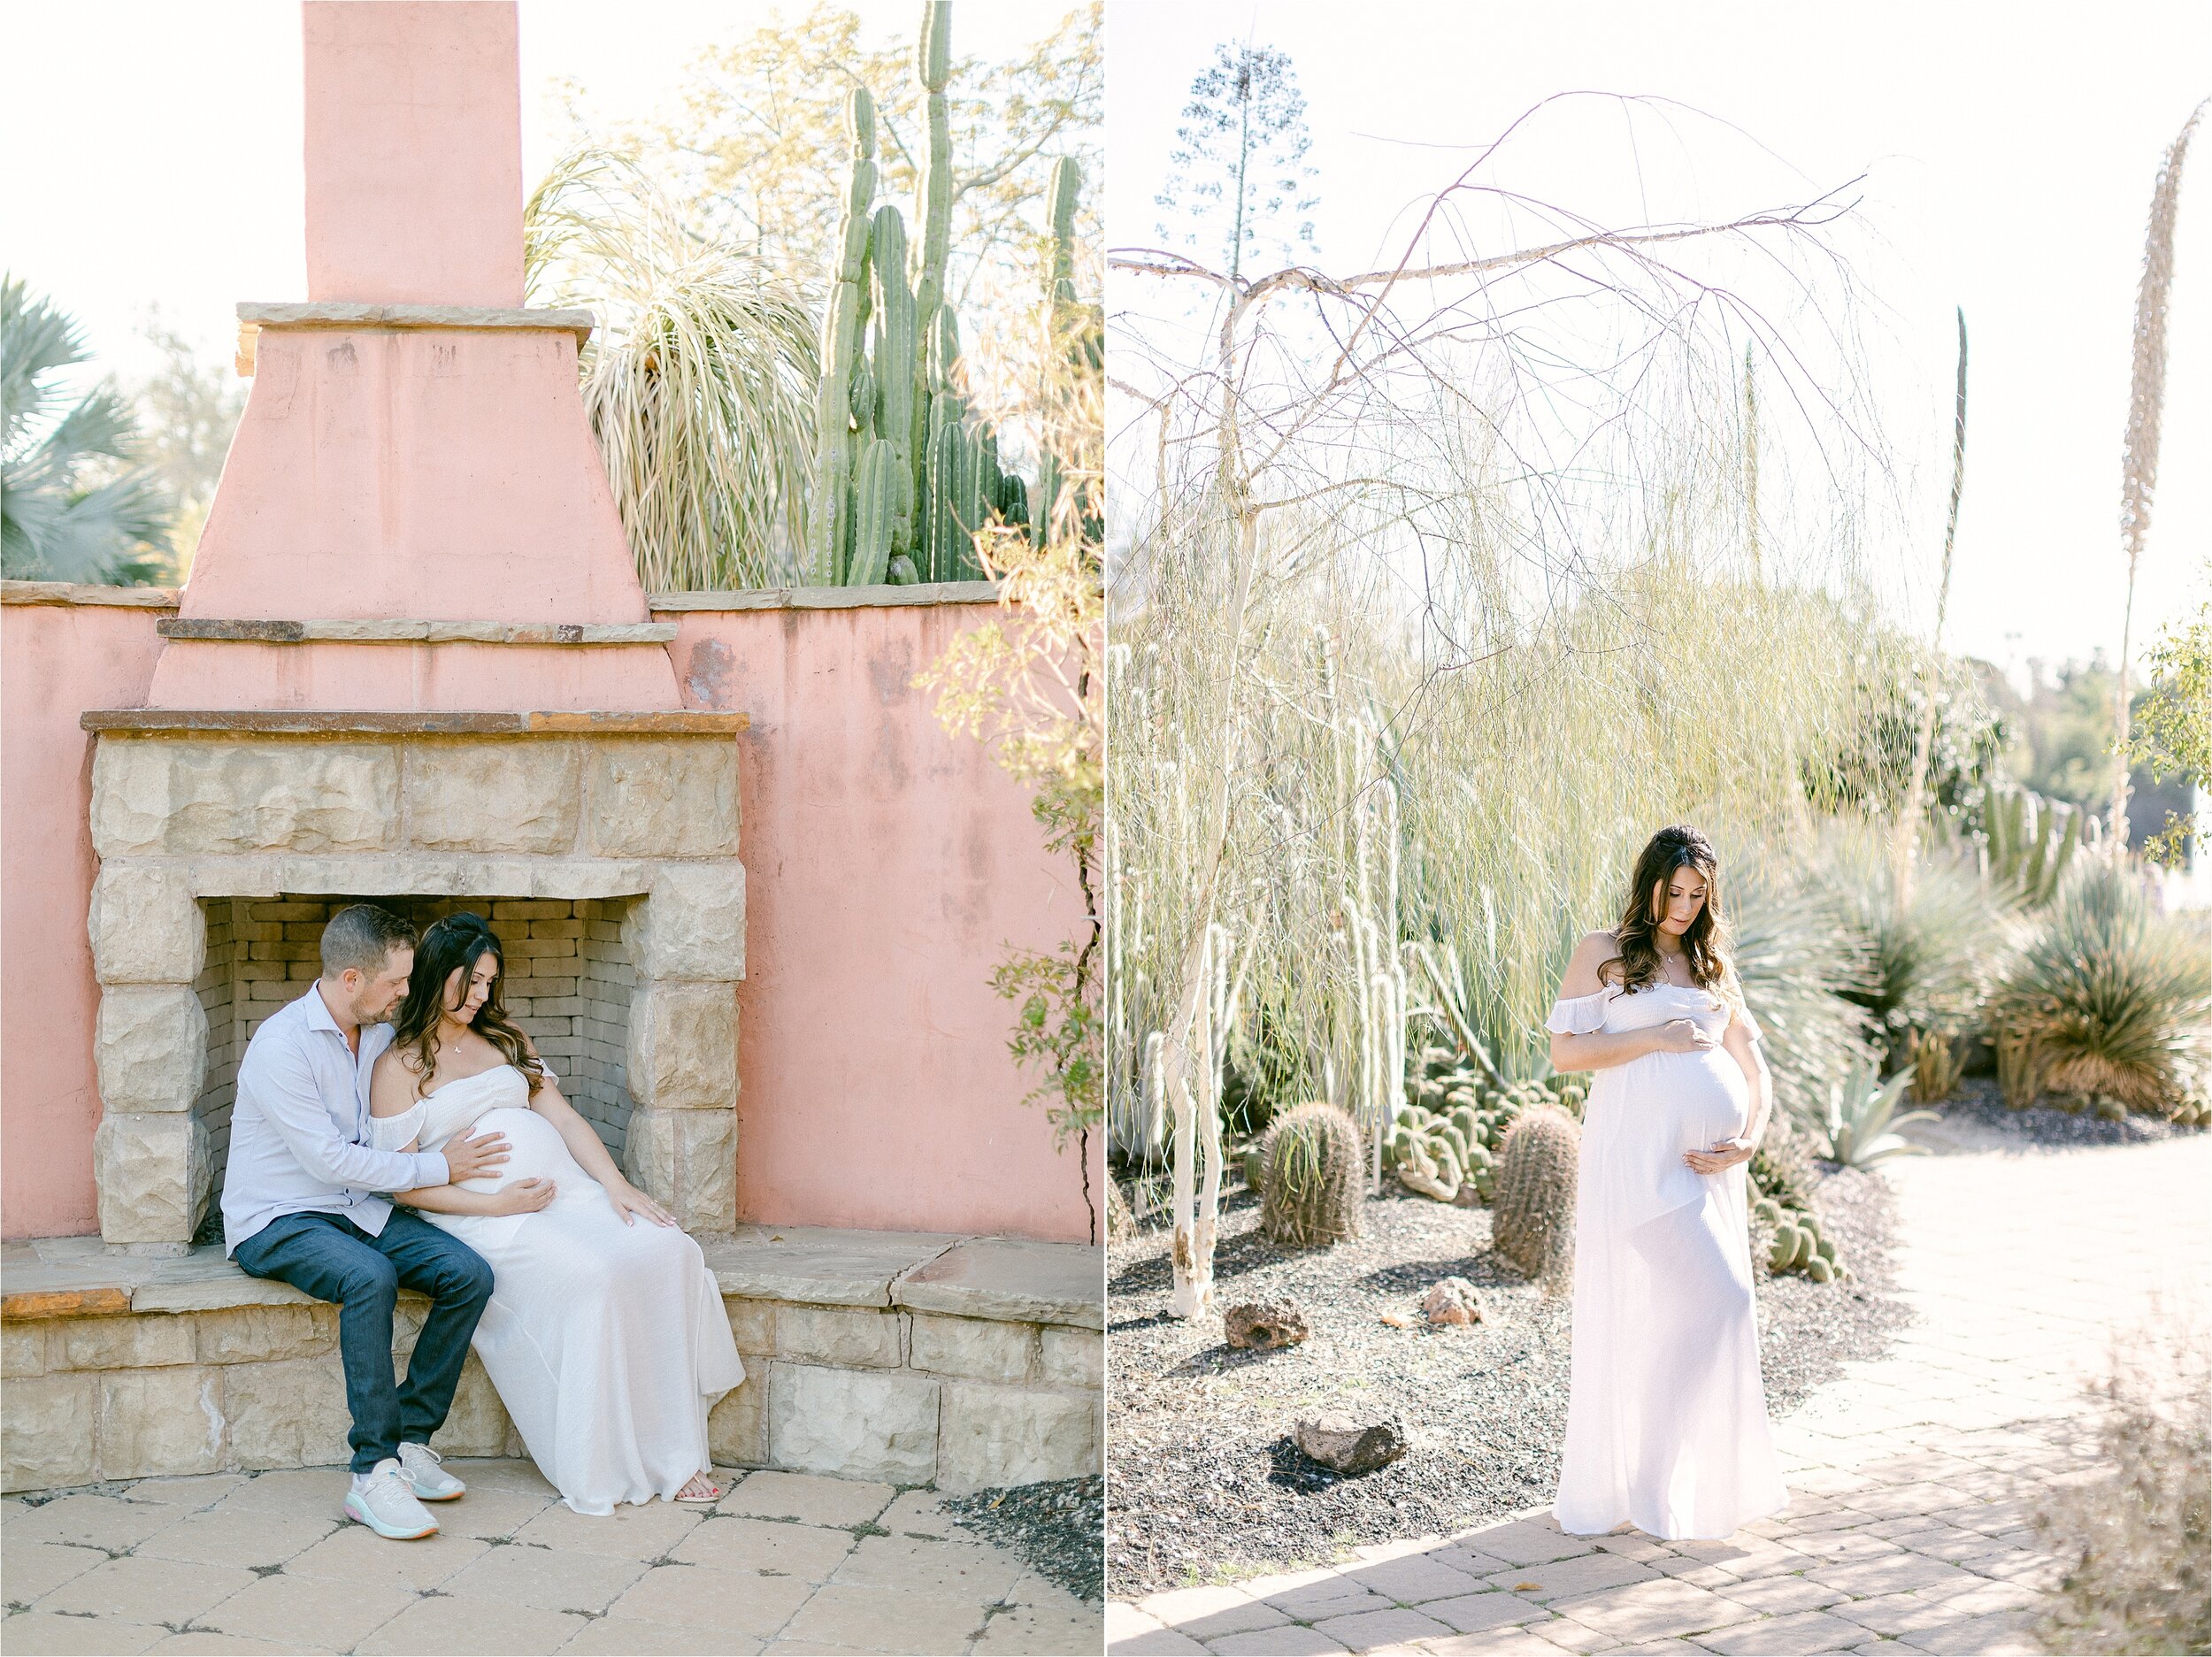 A husband and wife sit on the hearth of a terracotta fireplace during their desert inspired maternity photos taken at the LA Arboretum.